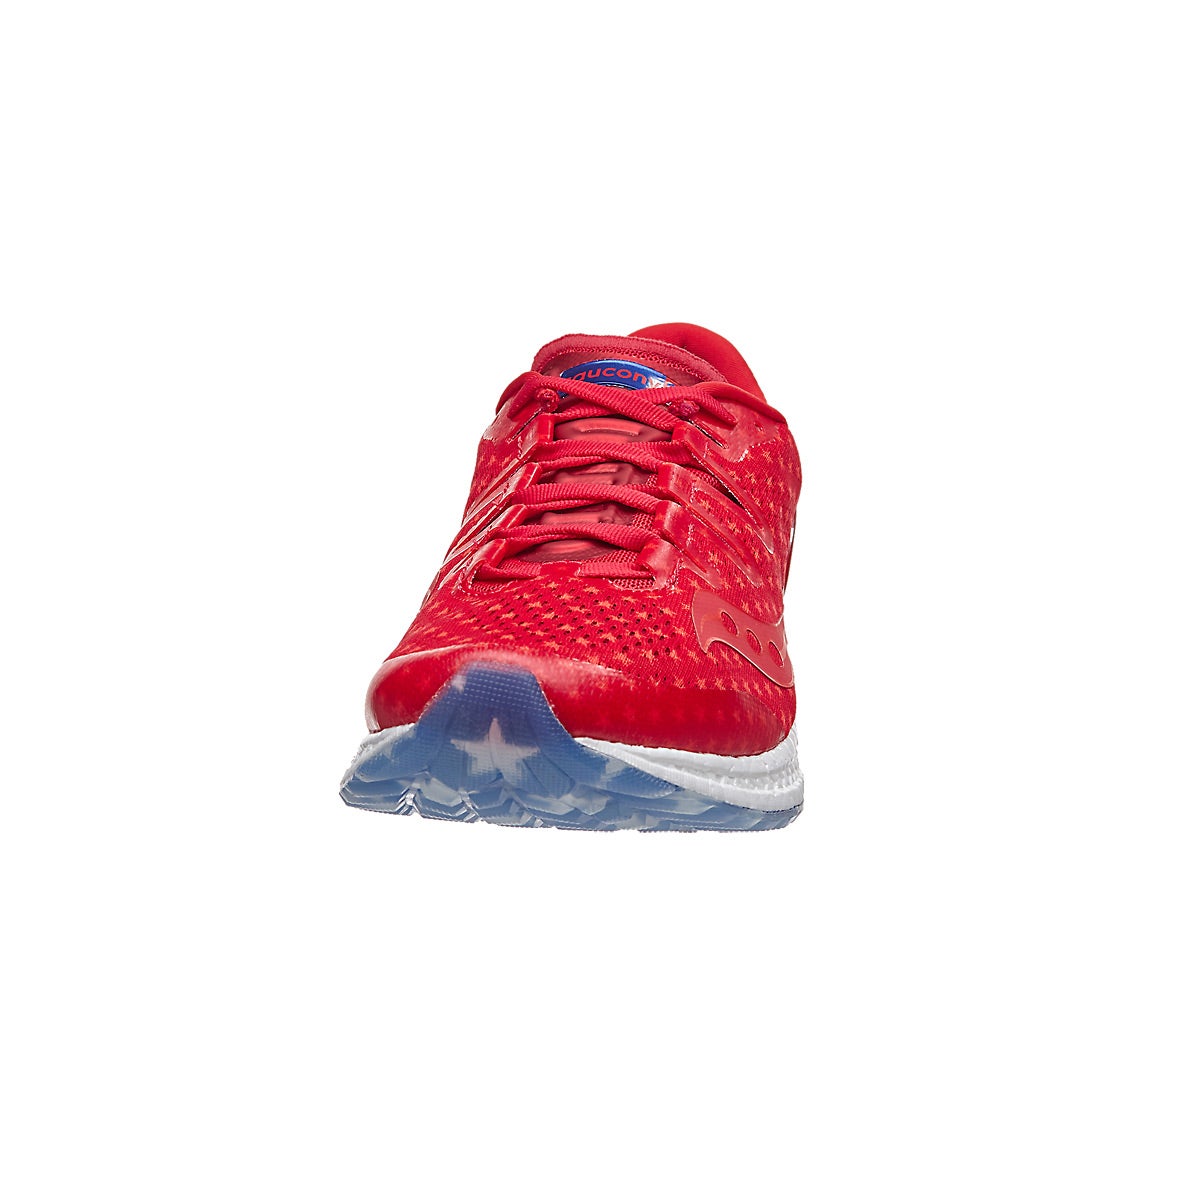 Saucony Freedom ISO Men's Shoes Red 